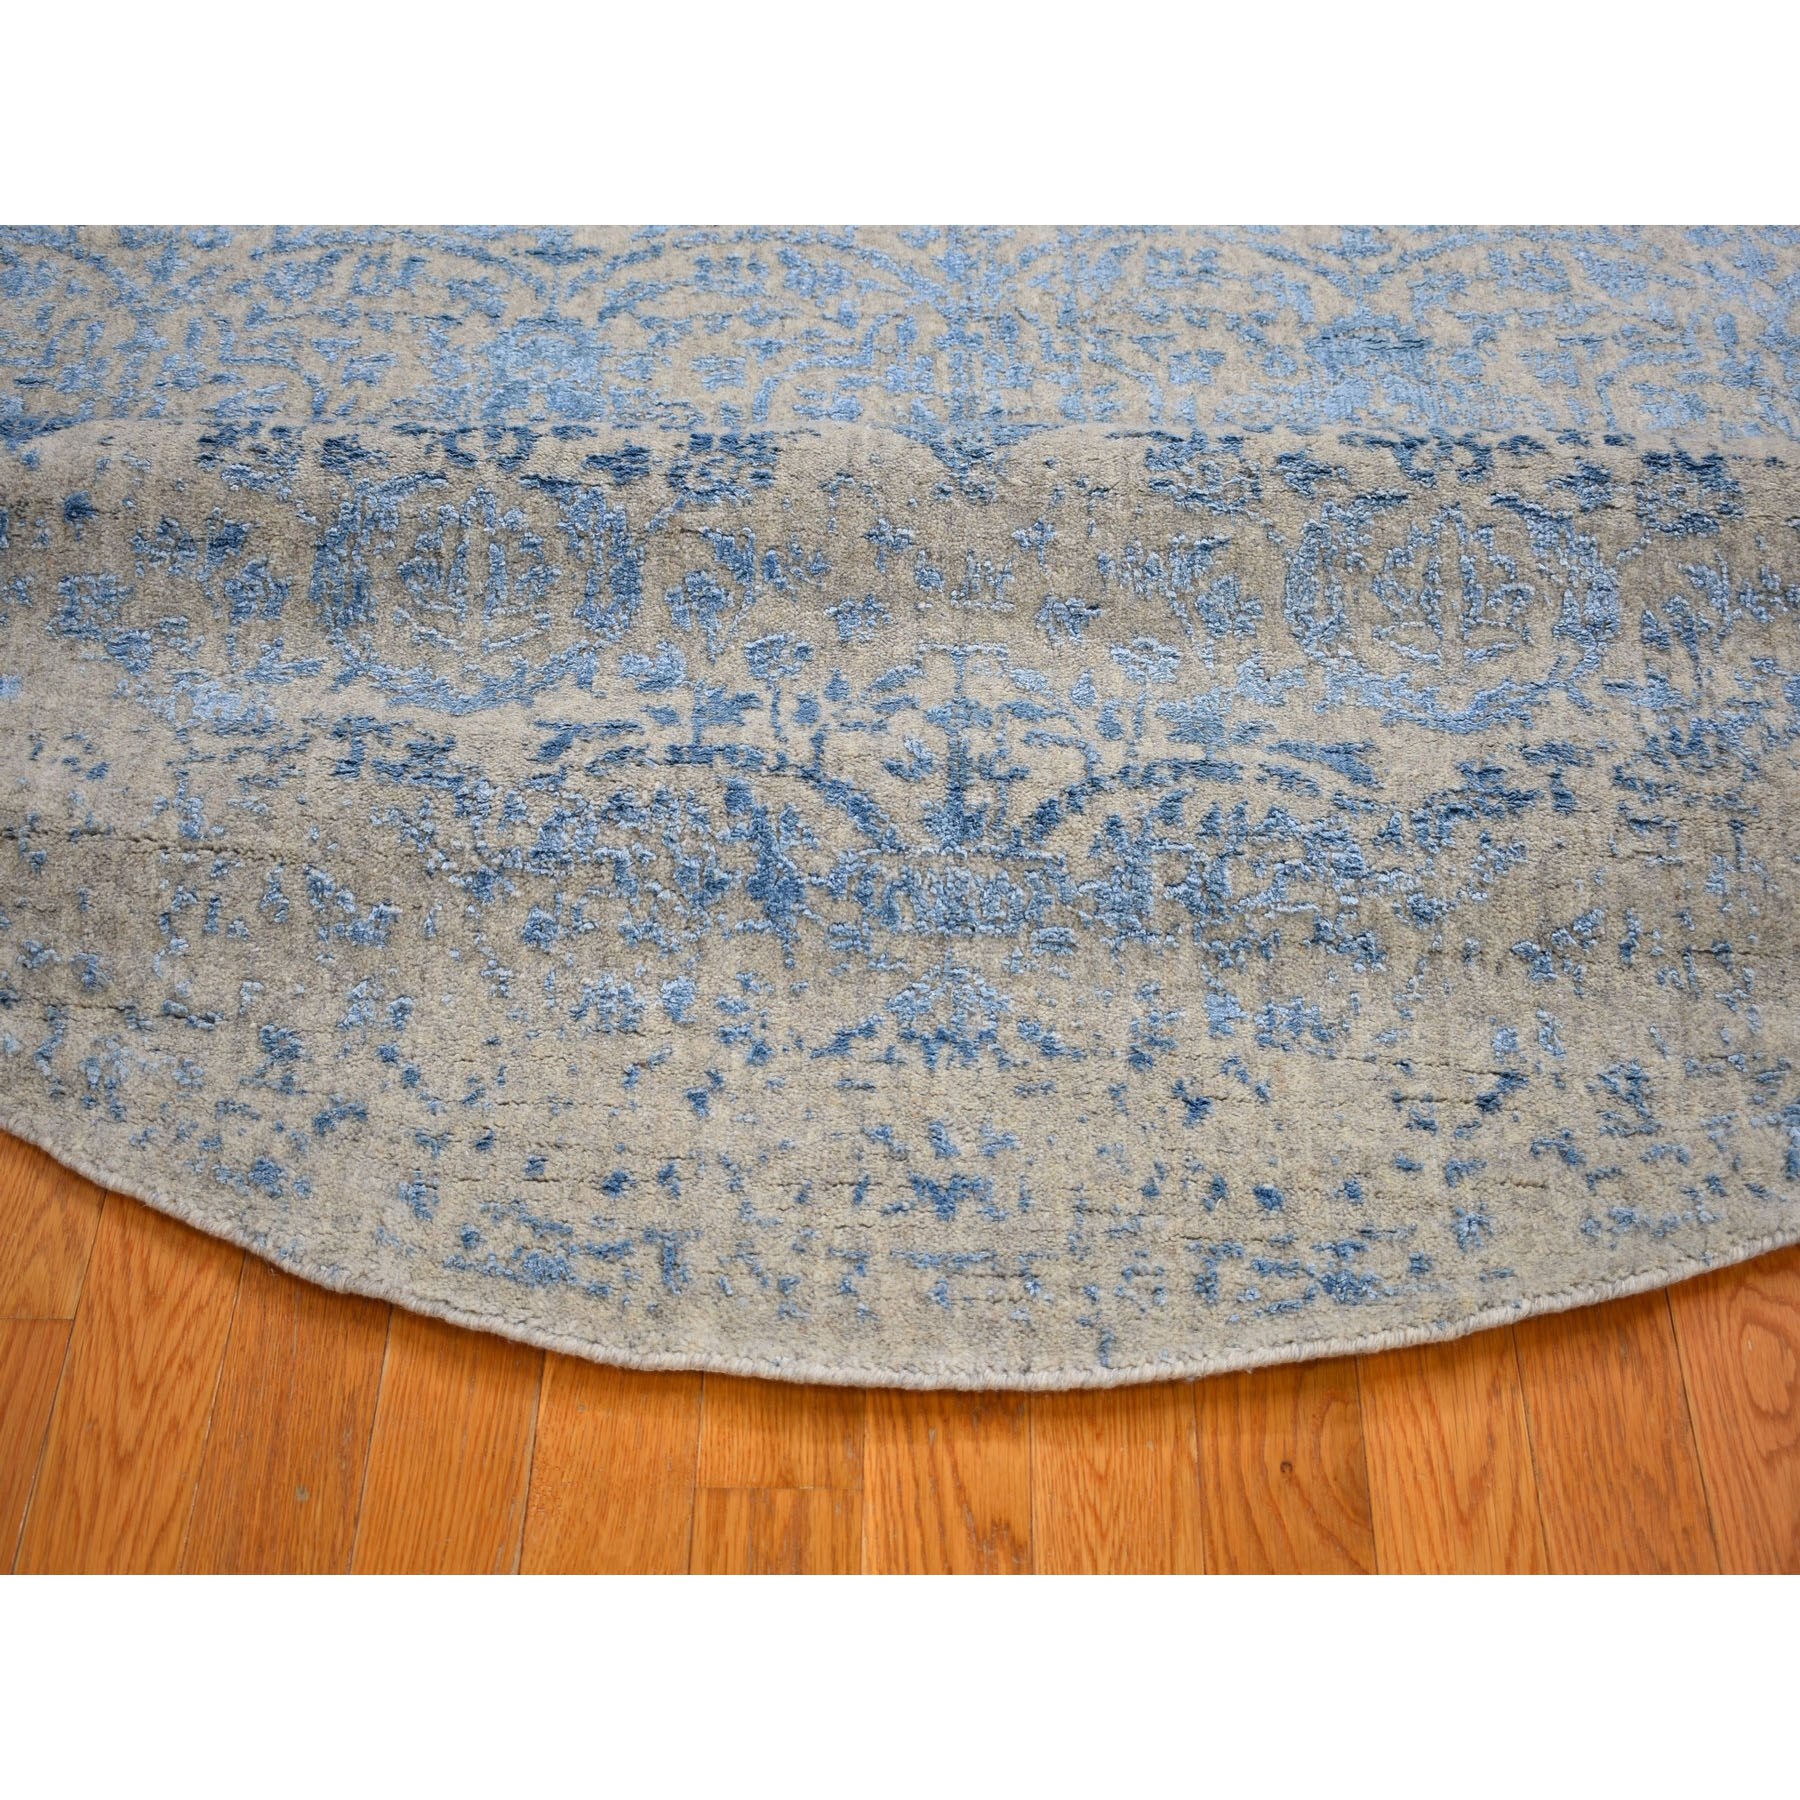 7-10 x7-10  Blue Jacquard Hand Loomed Wool and Art Silk Pomegranate Design Round Oriental Rug 